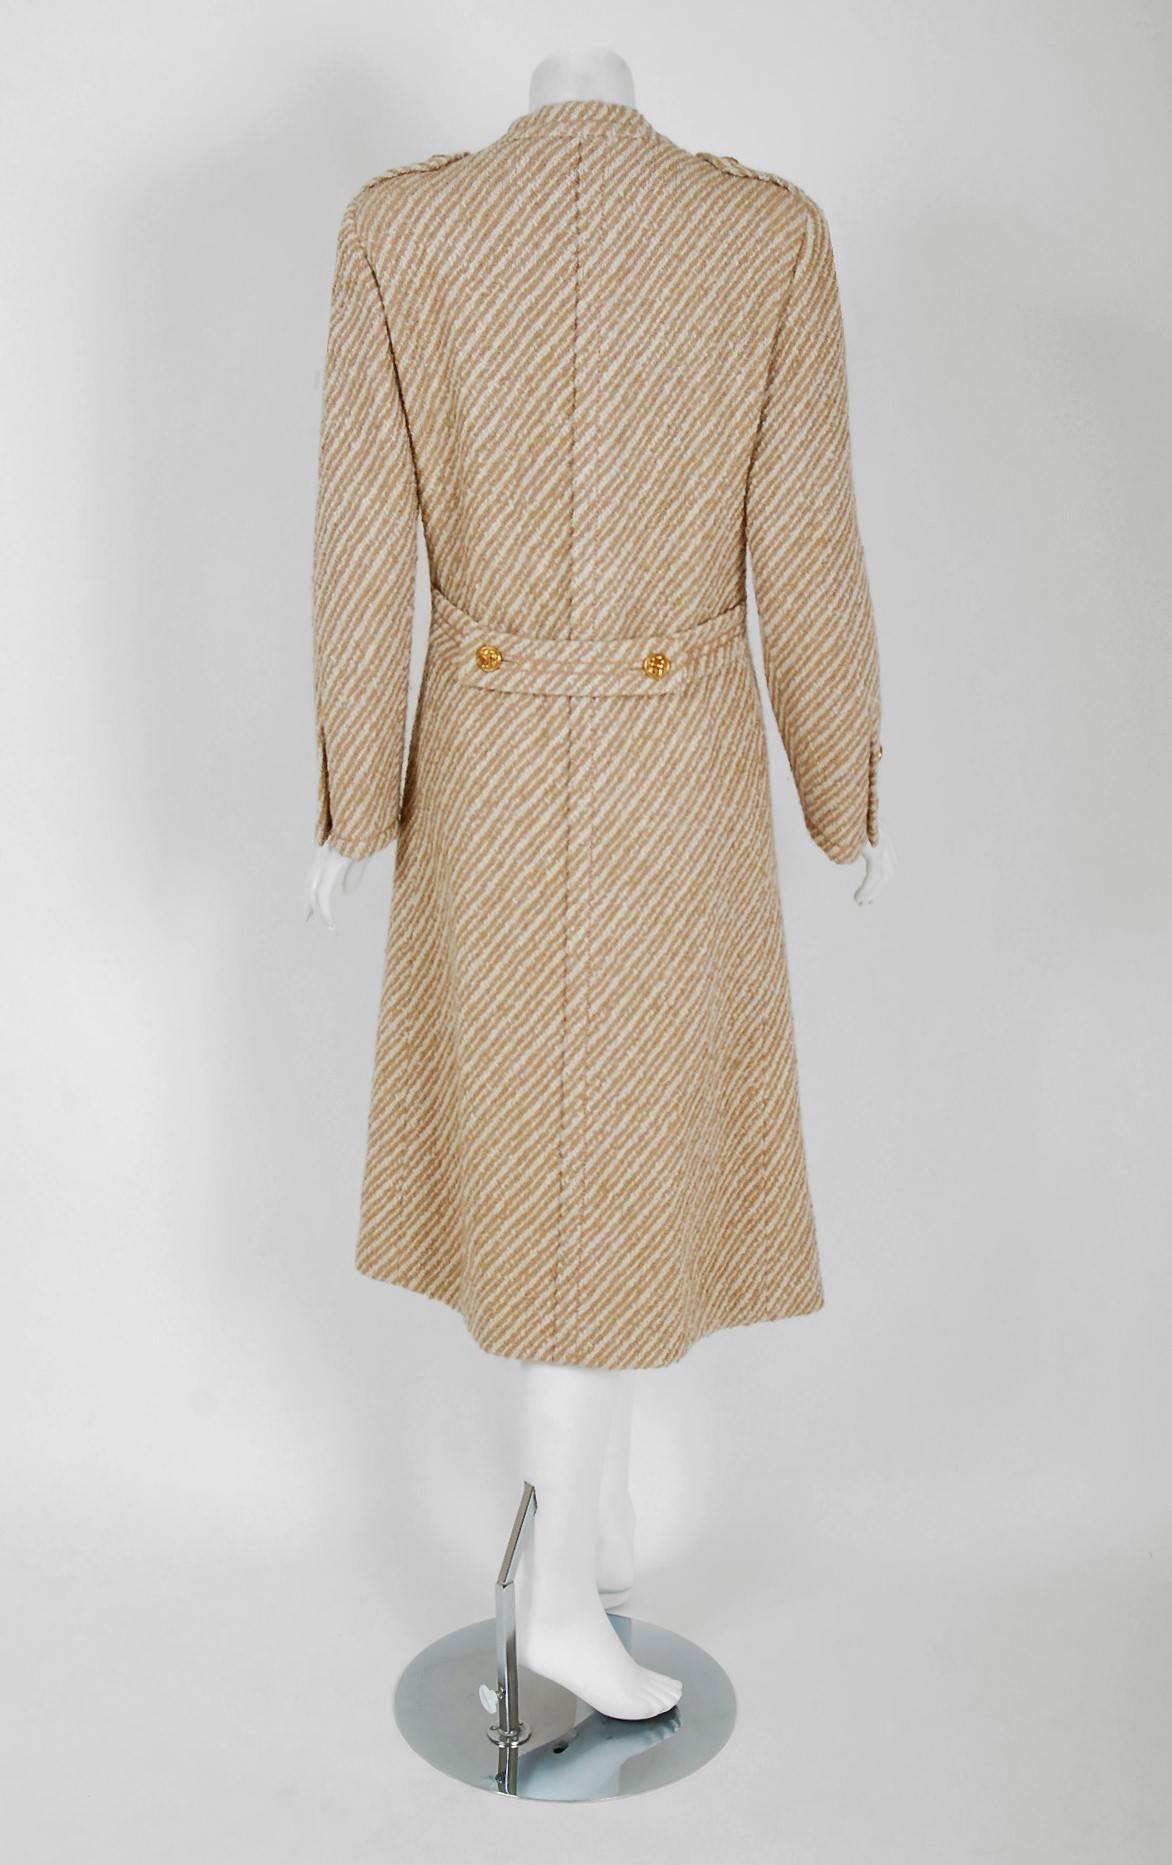 1972 Chanel Haute-Couture Ivory & Beige Striped Wool Mod Military Jacket Coat 1